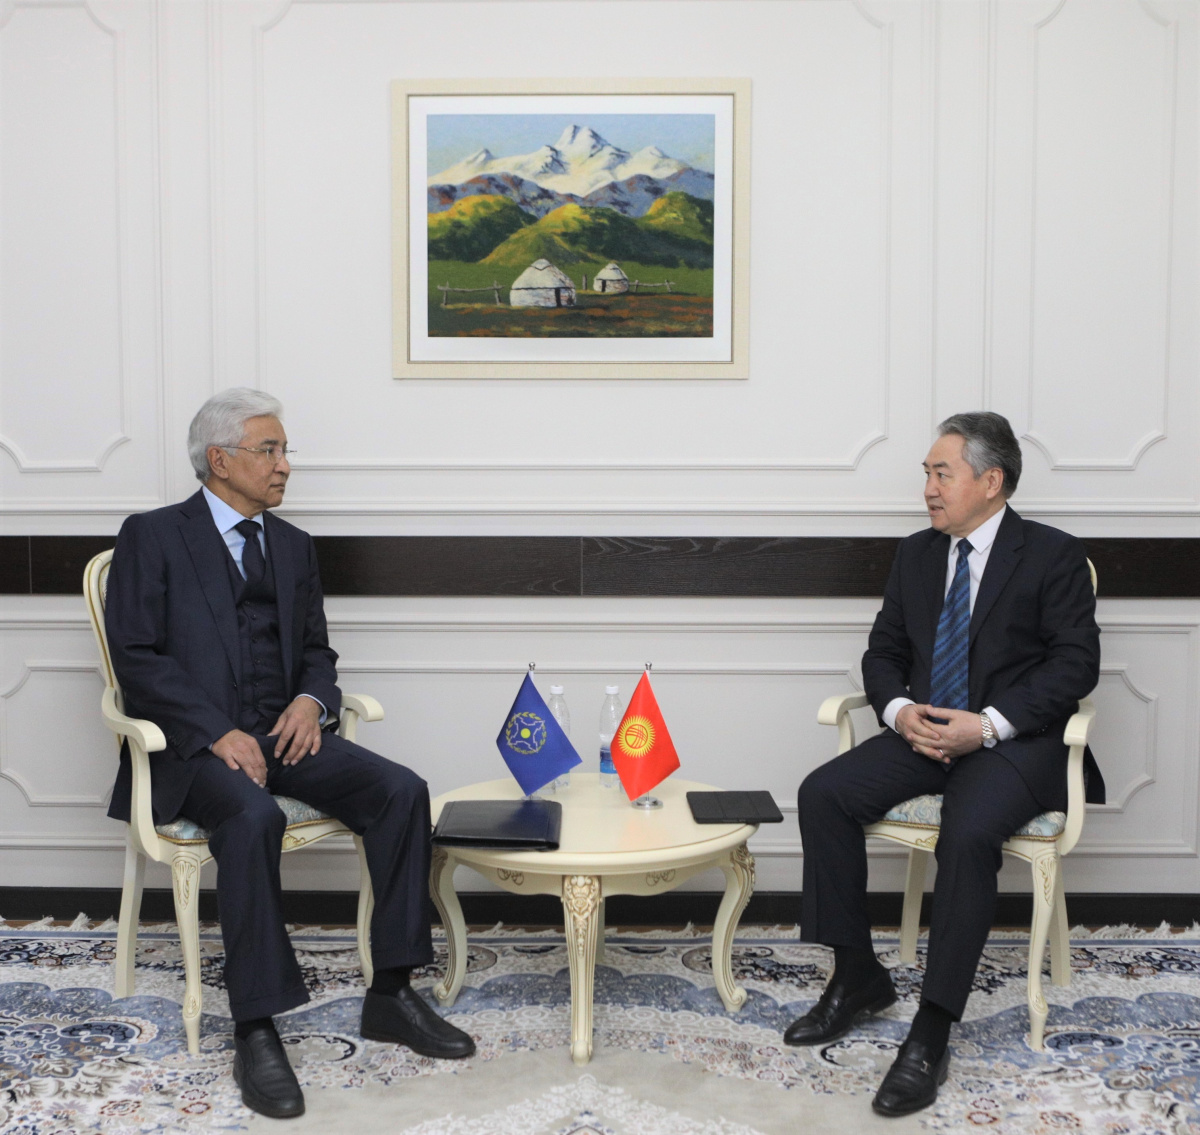 In Bishkek, the CSTO Secretary General Imangali Tasmagambetov had a meeting with the Minister of Foreign Affairs of the Kyrgyz Republic Jeenbek Kulubayev